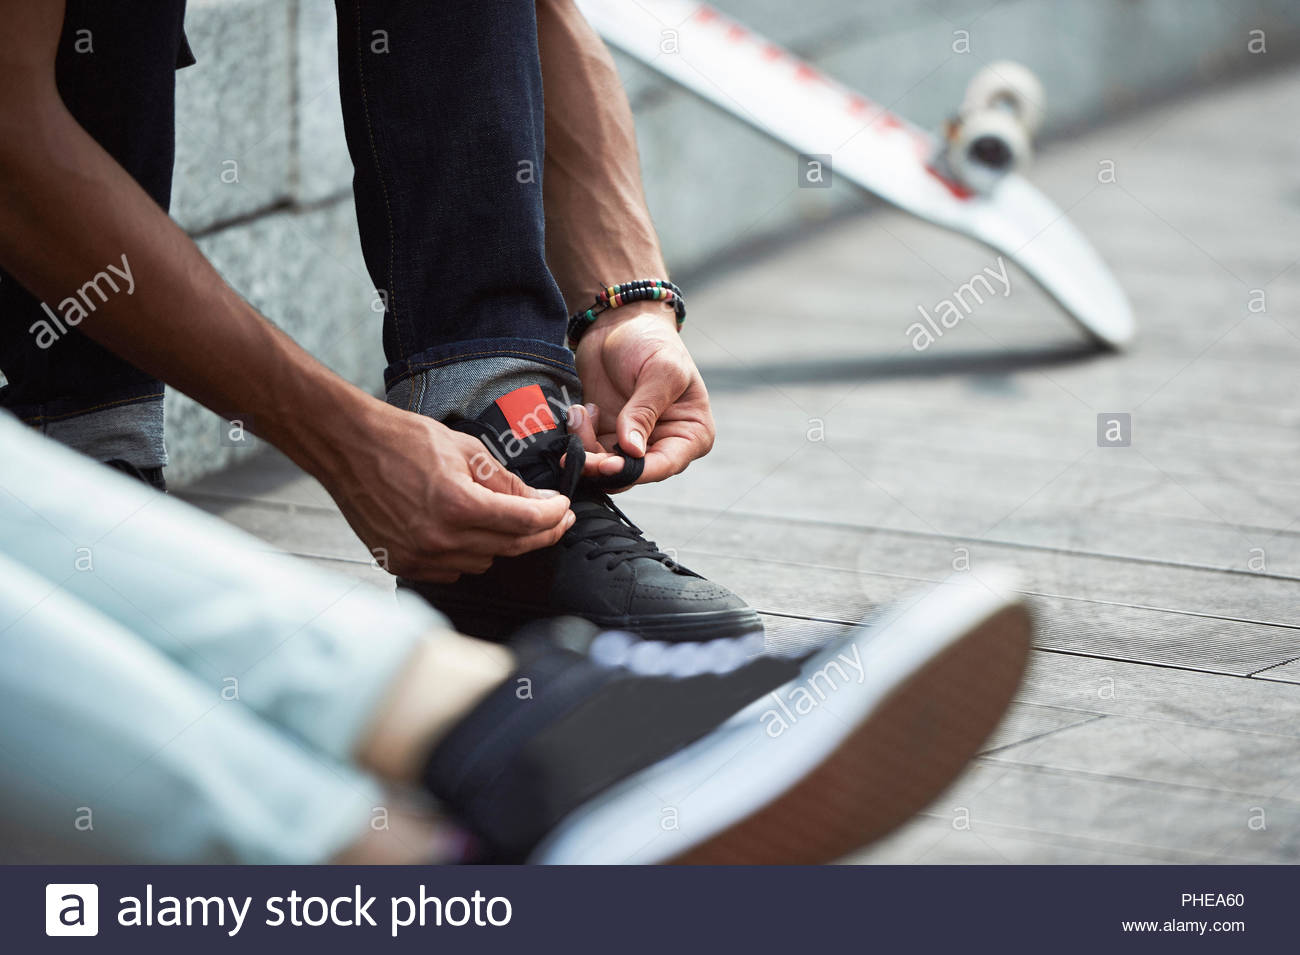 tying his shoelaces